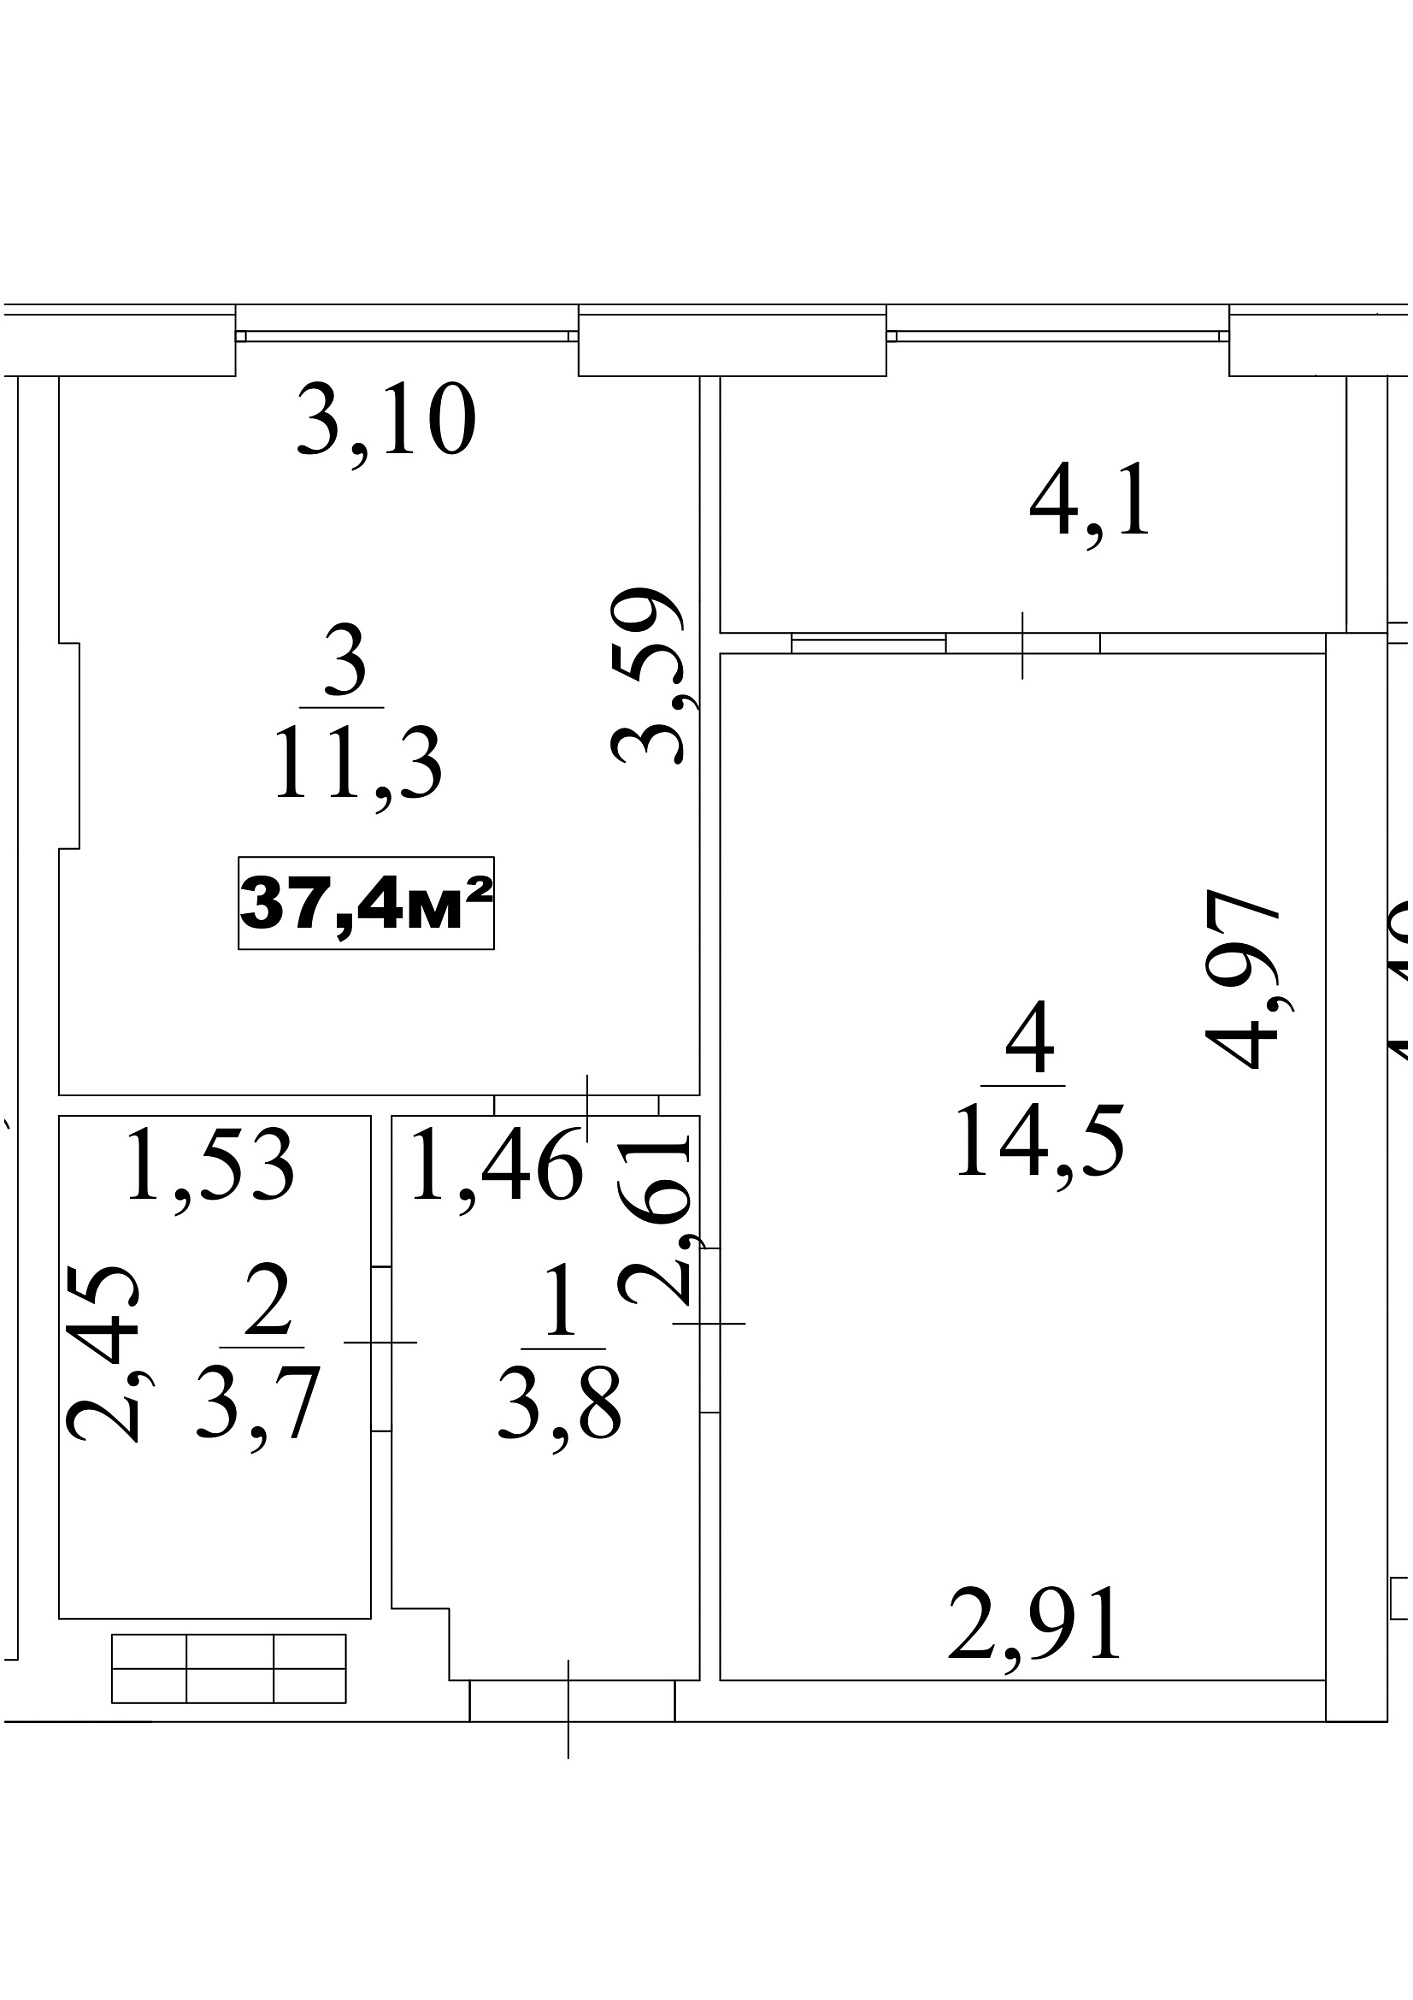 Planning 1-rm flats area 37.4m2, AB-10-10/0088а.